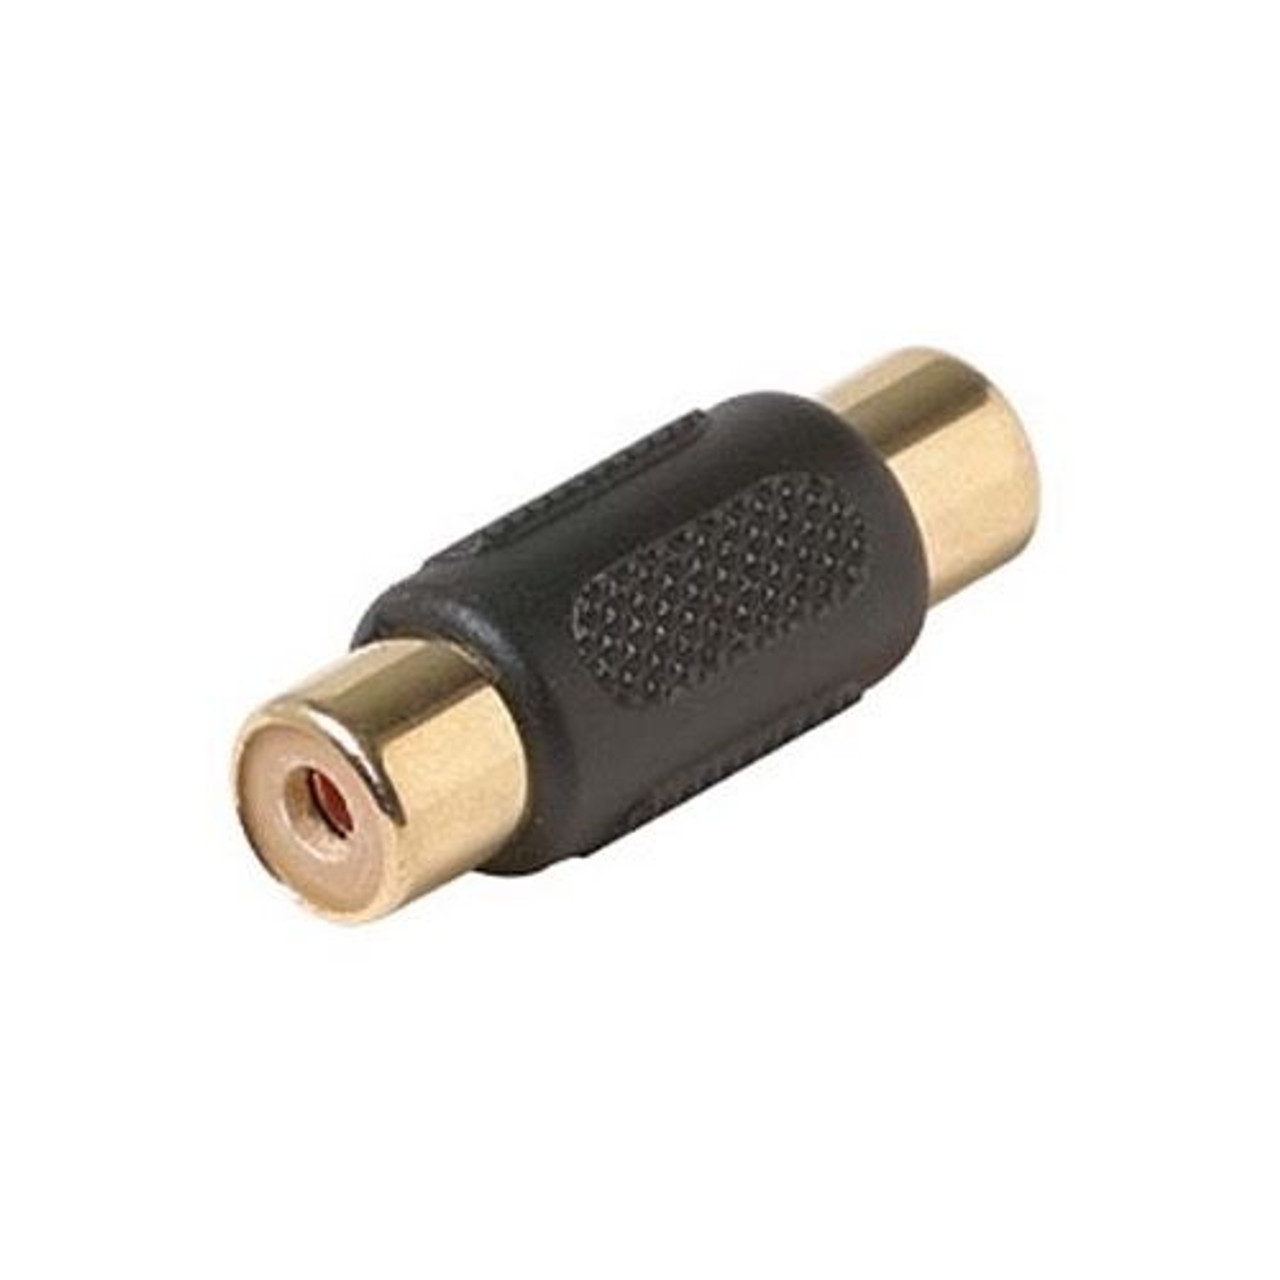 Eagle RCA Coupler Female to Female Gold Plate In-Line Jack Adapter Coupler Jack to Jack In-Line Splice 1 Pack Audio Signal Cable Joint Extender Patch Connector